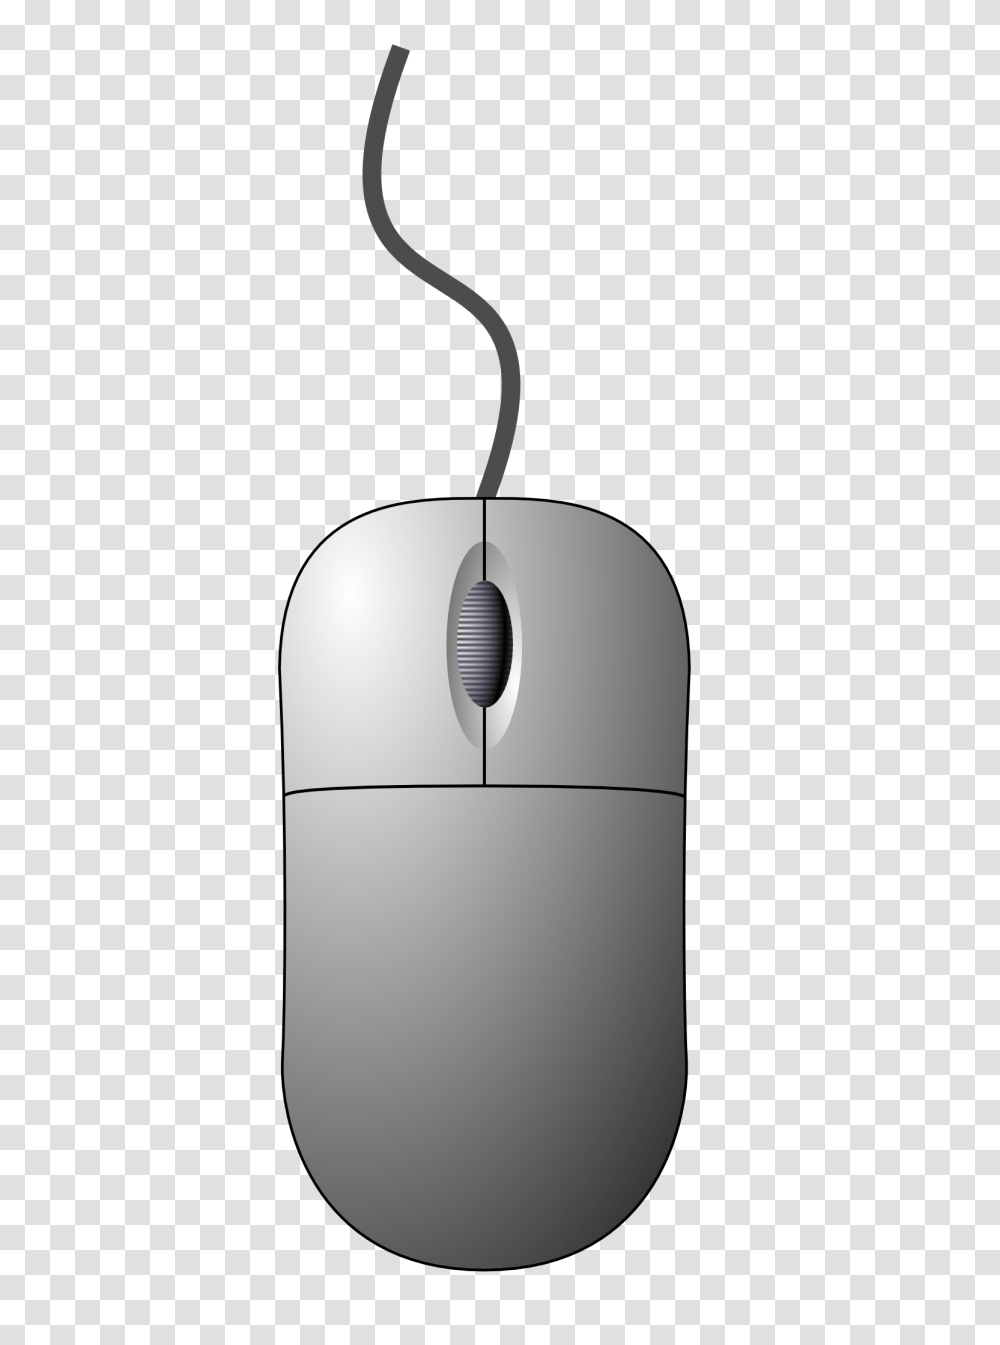 Computer Mouse Free Download, Electronics, Lamp, Hardware Transparent Png